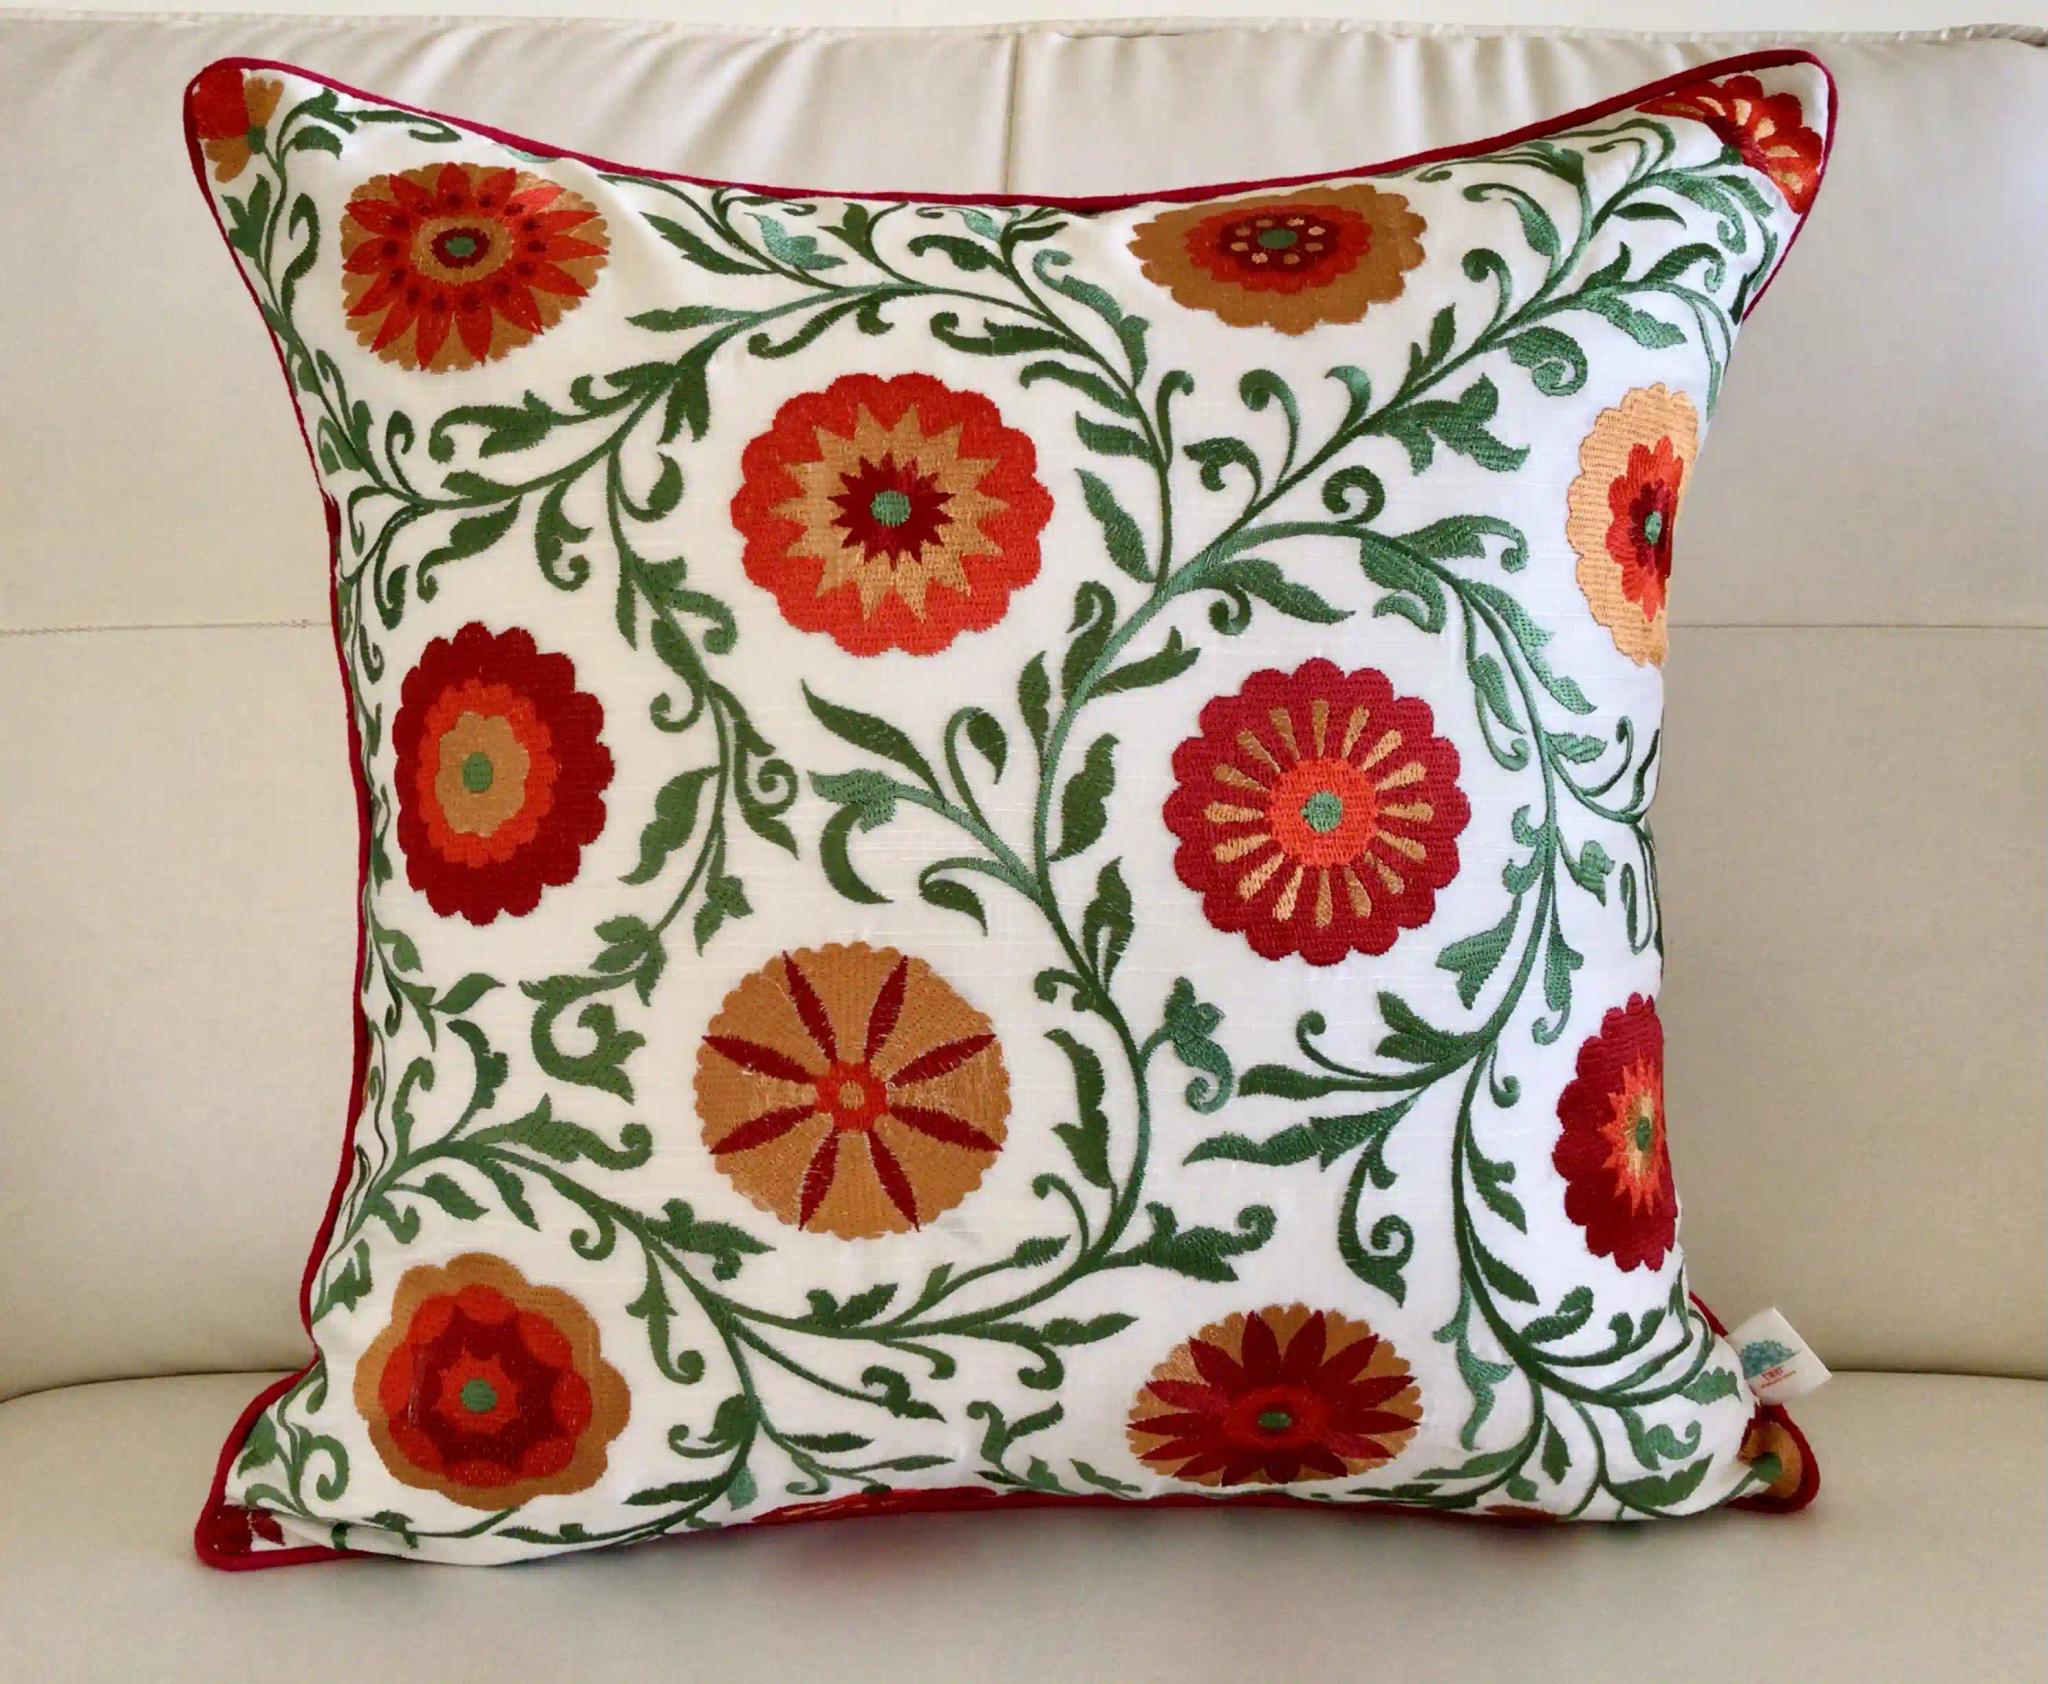 Shaan-e-Gulmarg-  Embroidered Cotton Silk Cushion Cover- Multicolor- Set of 2